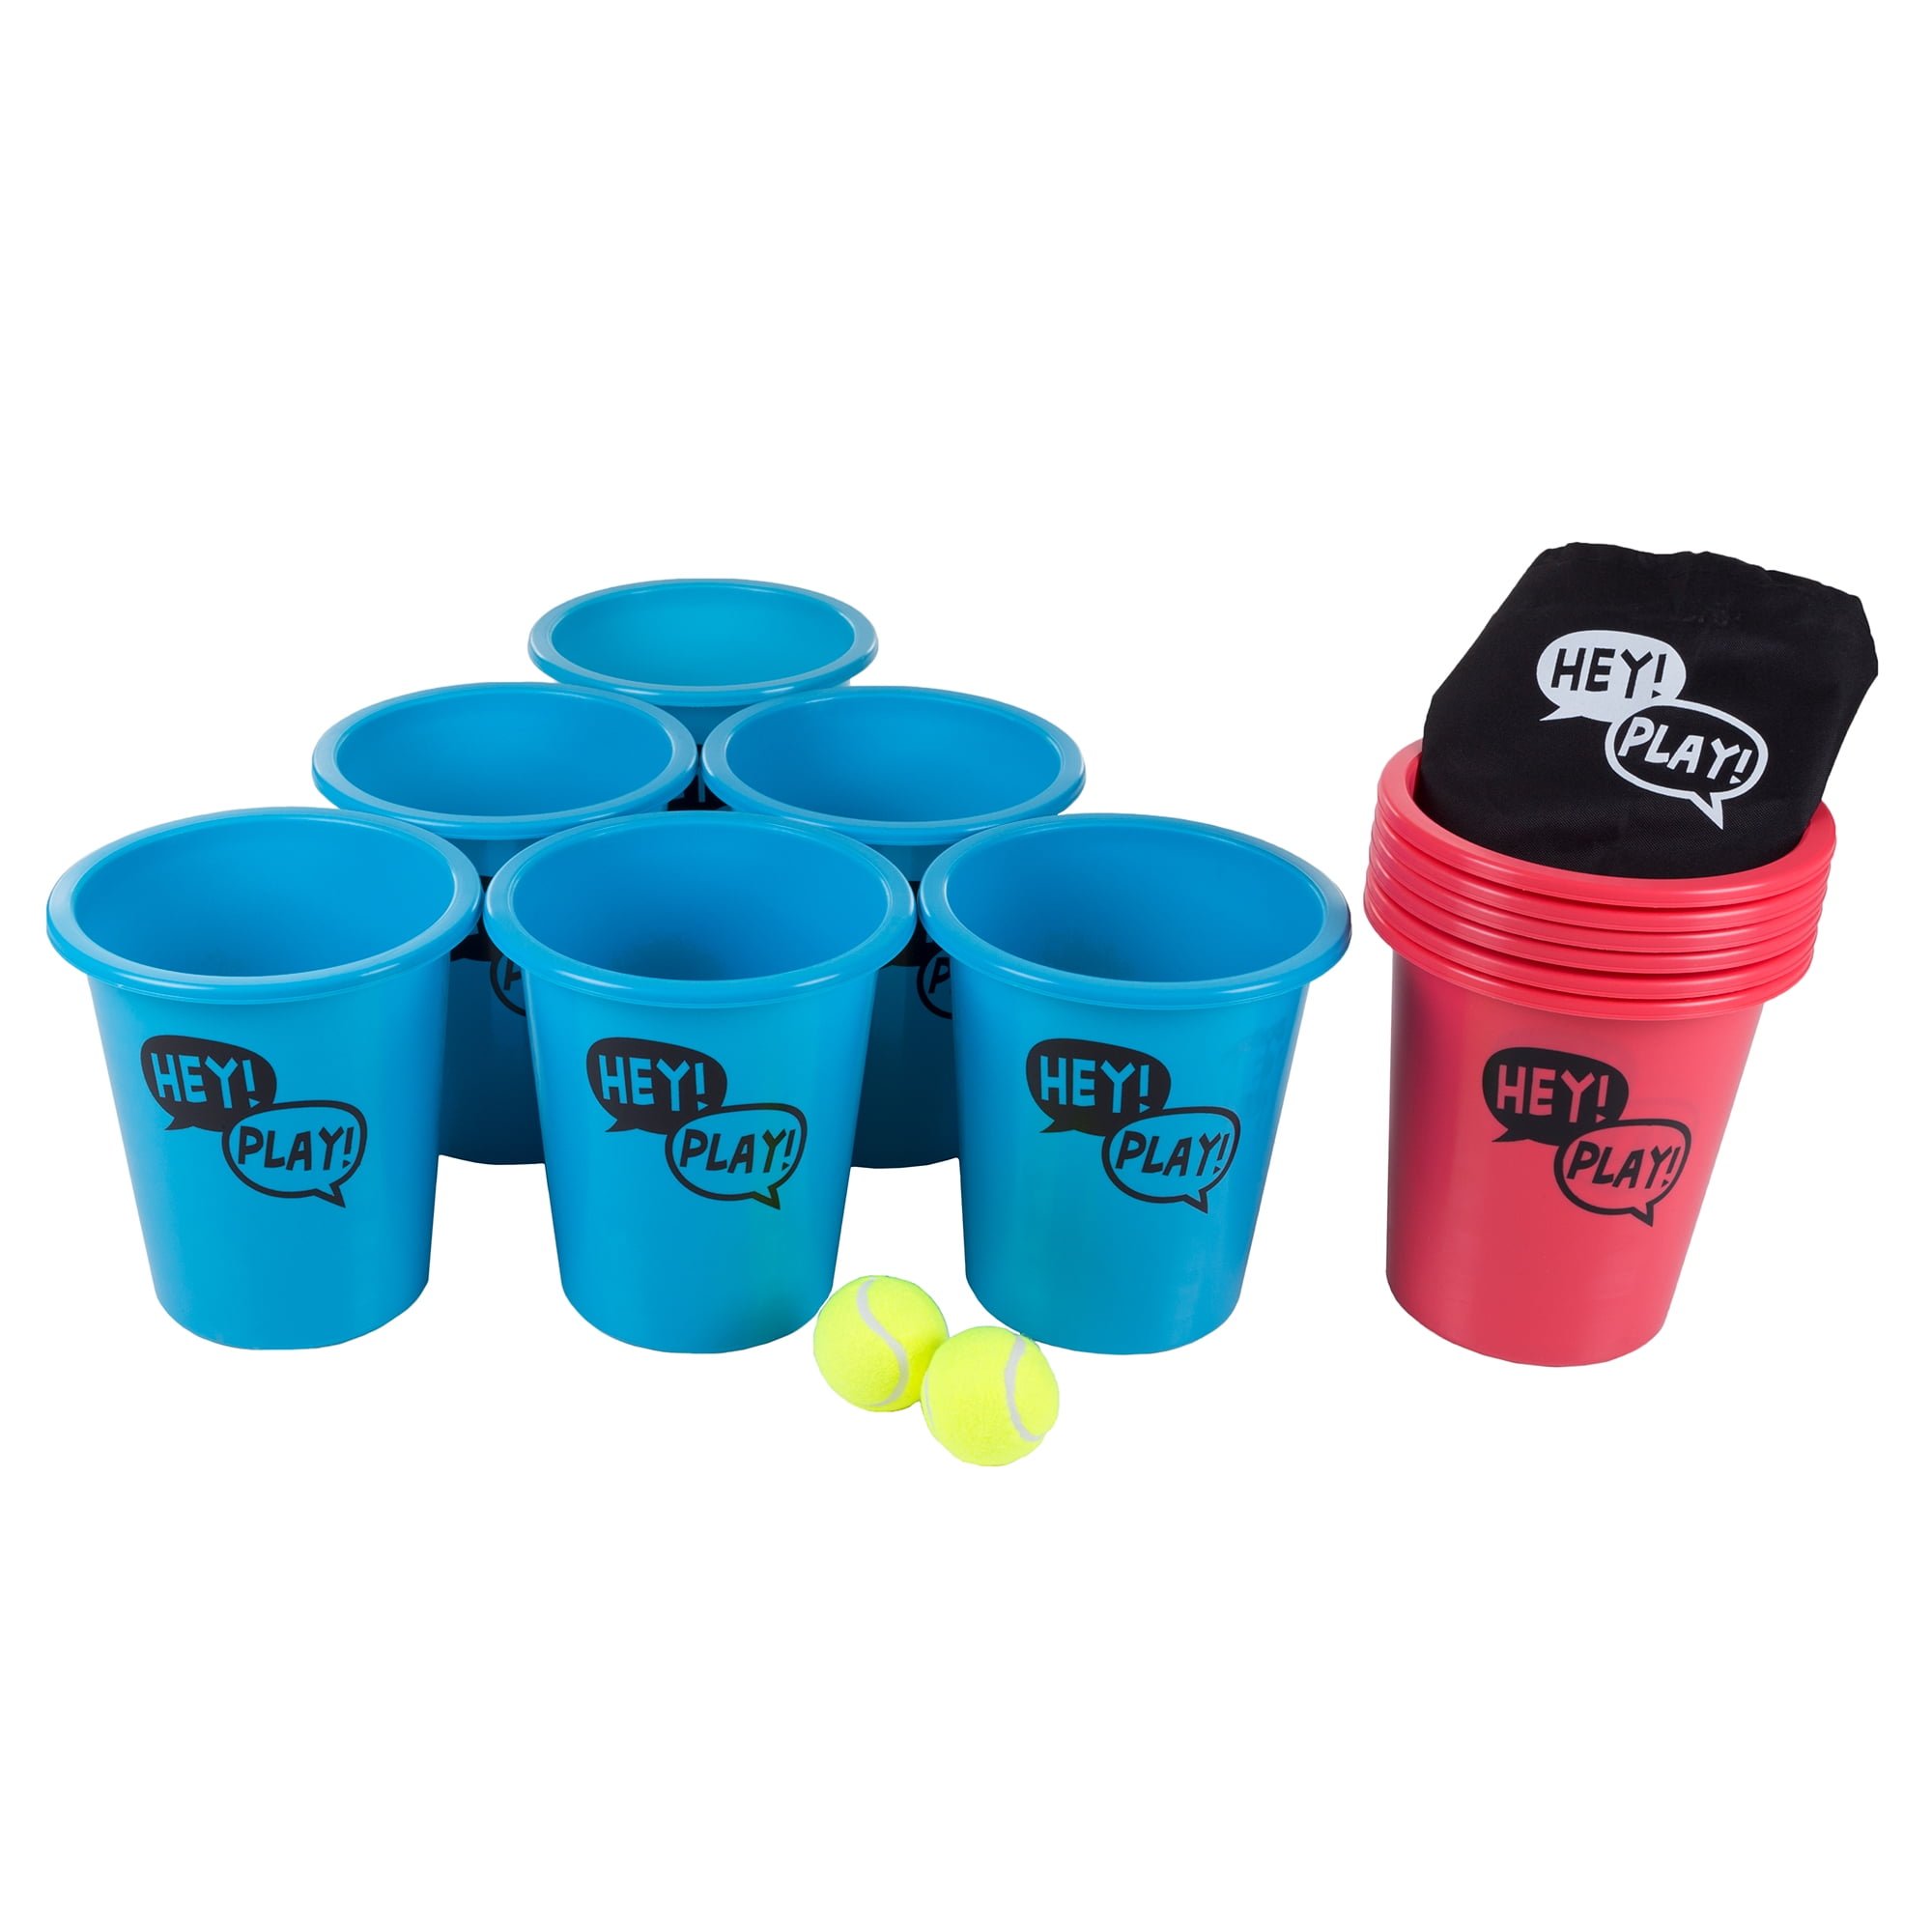 BucketBall Original Yard Pong Game Ultimate Tailgate Game Team Color Edition 12 Color Options